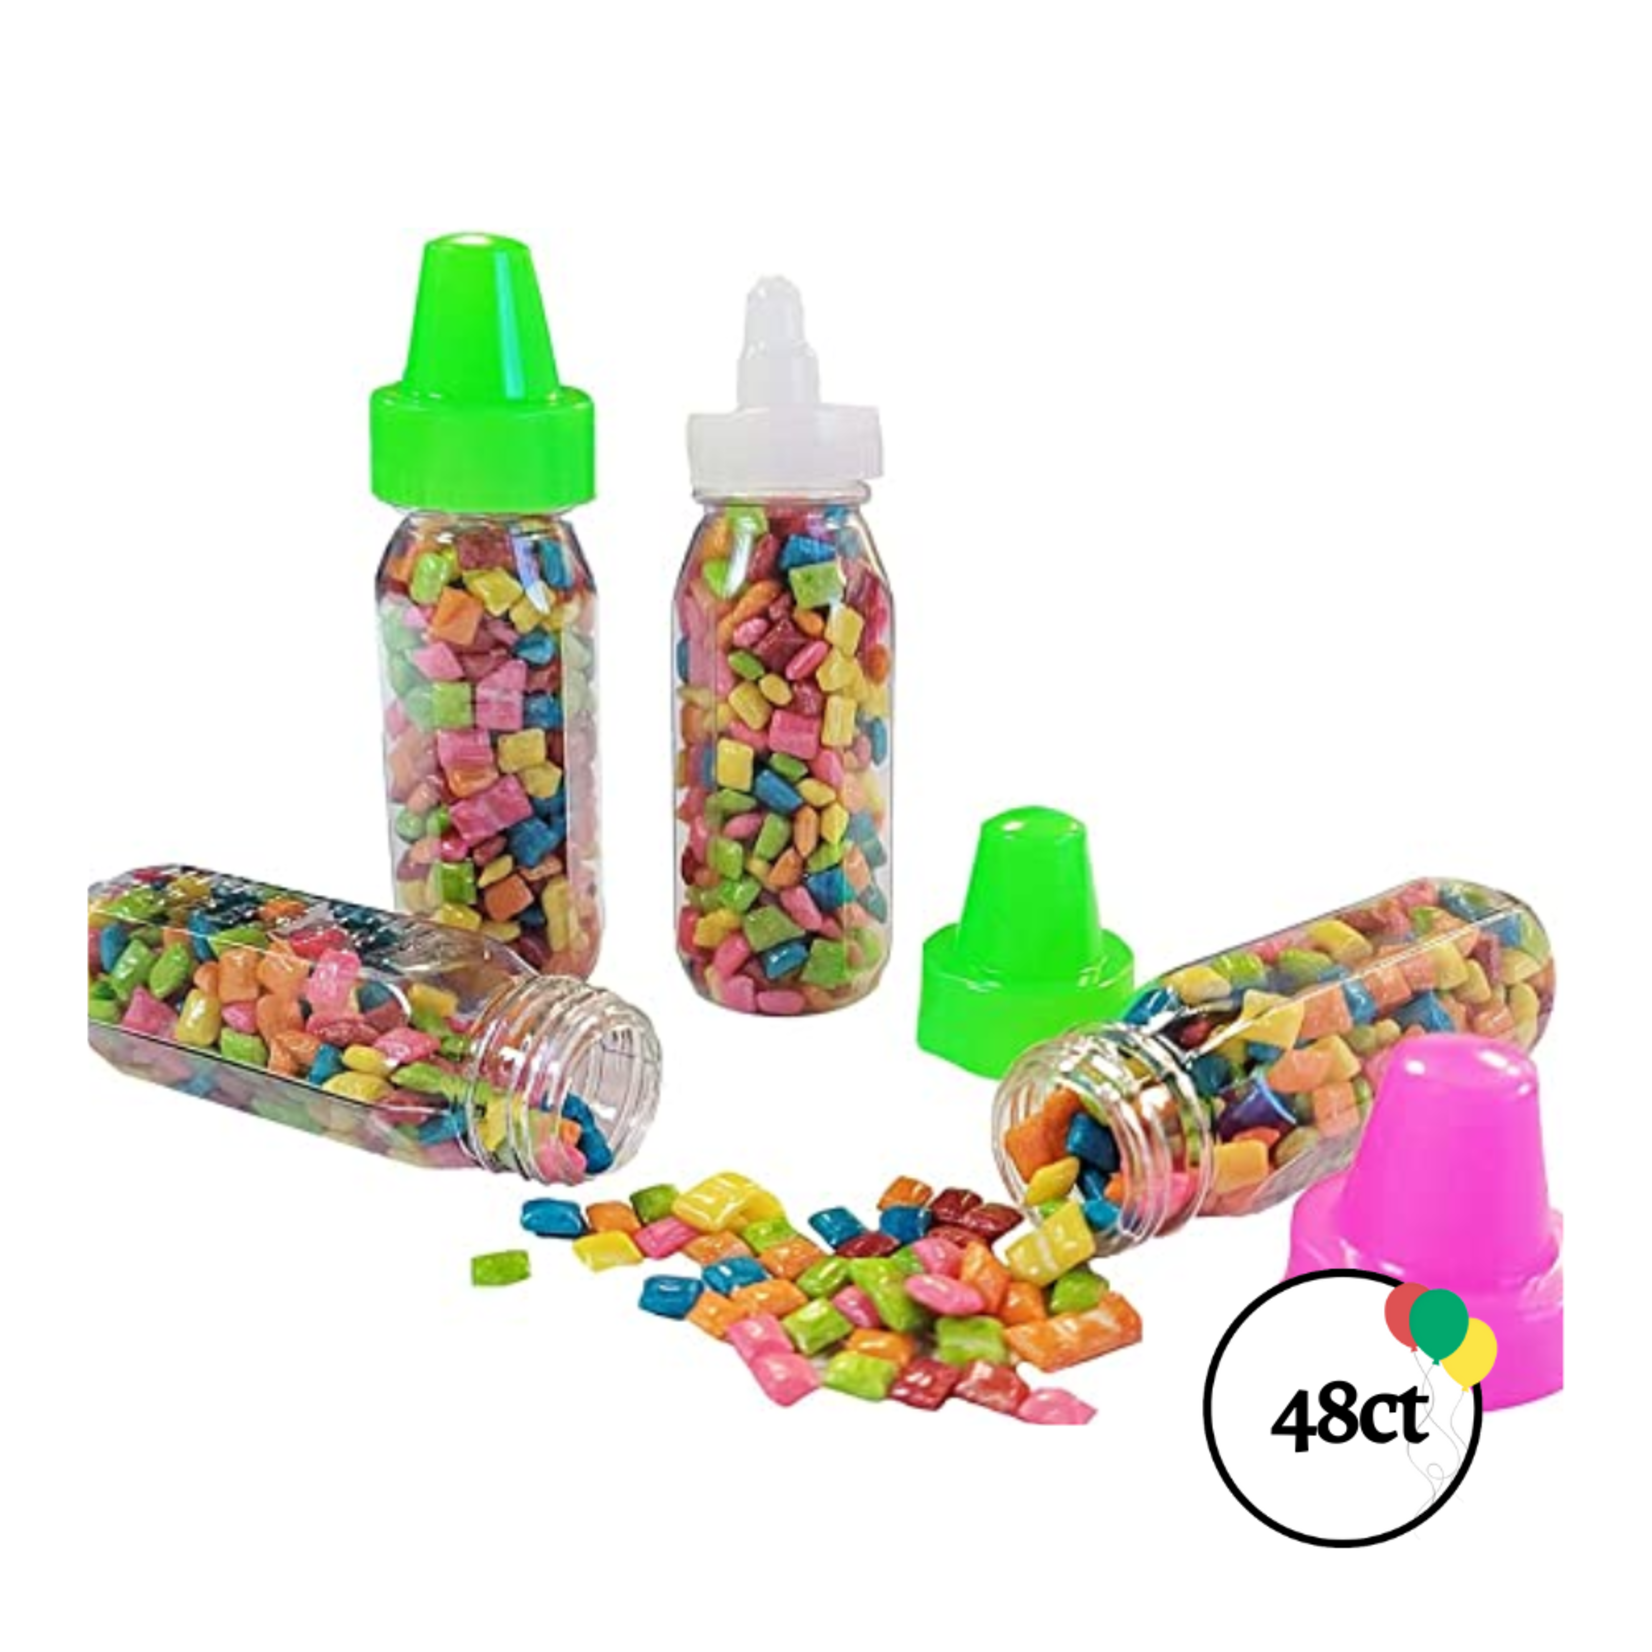 Baby Bottles With Candy 48ct